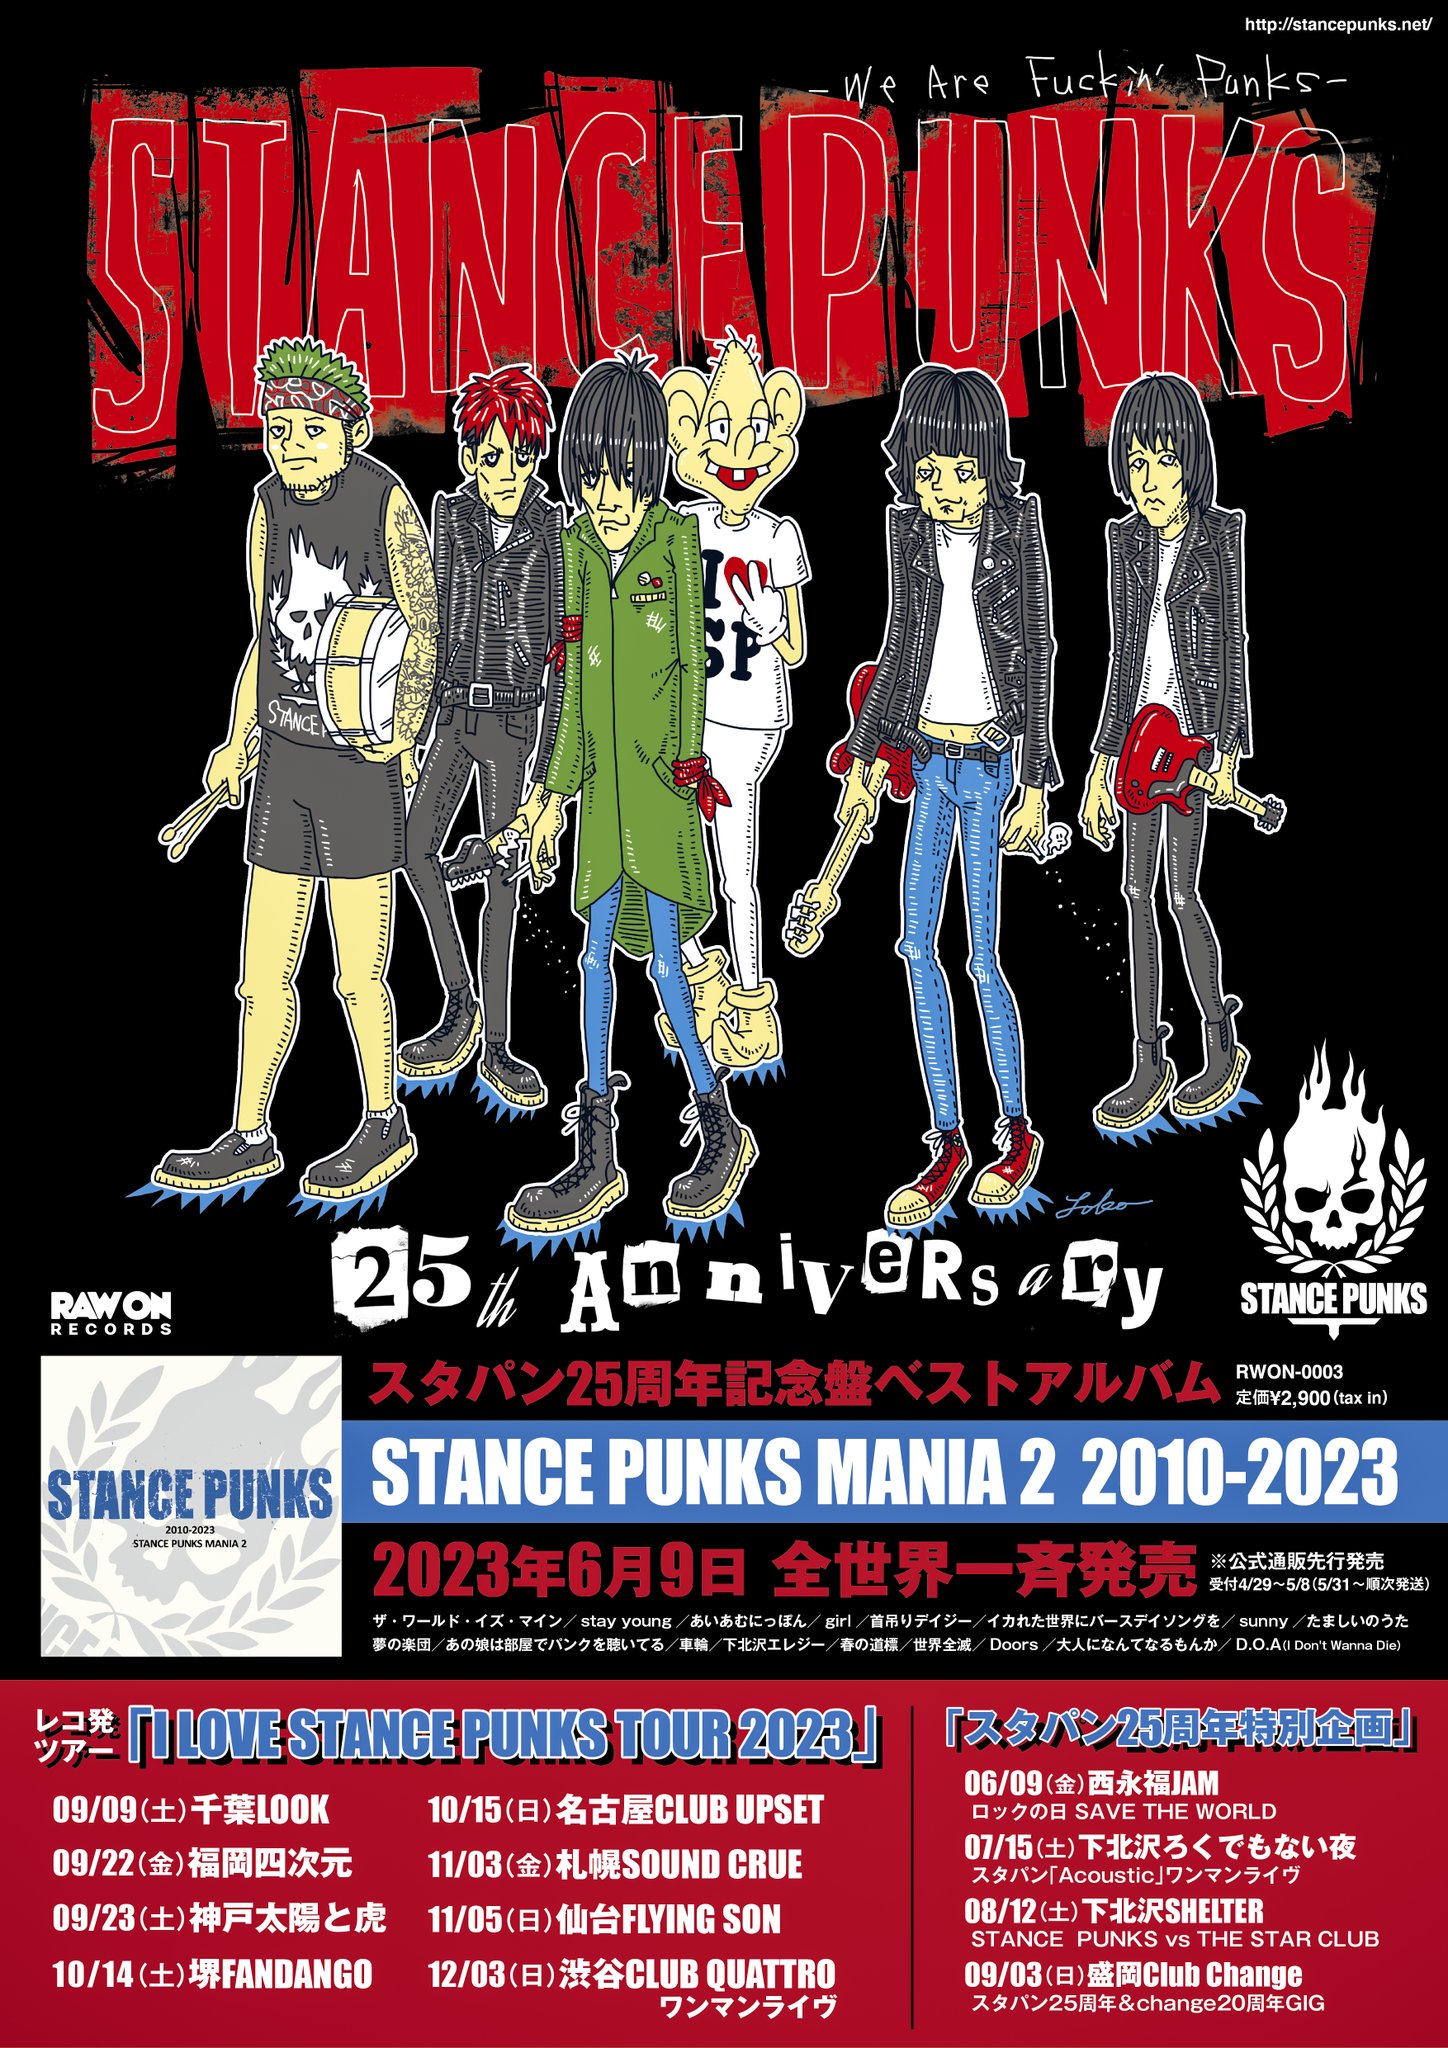 STANCE PUNKS 25th Anniversary 〜火の玉宣言スペシャル三発目〜 STANCE PUNKS -Acoustic One Man Show-